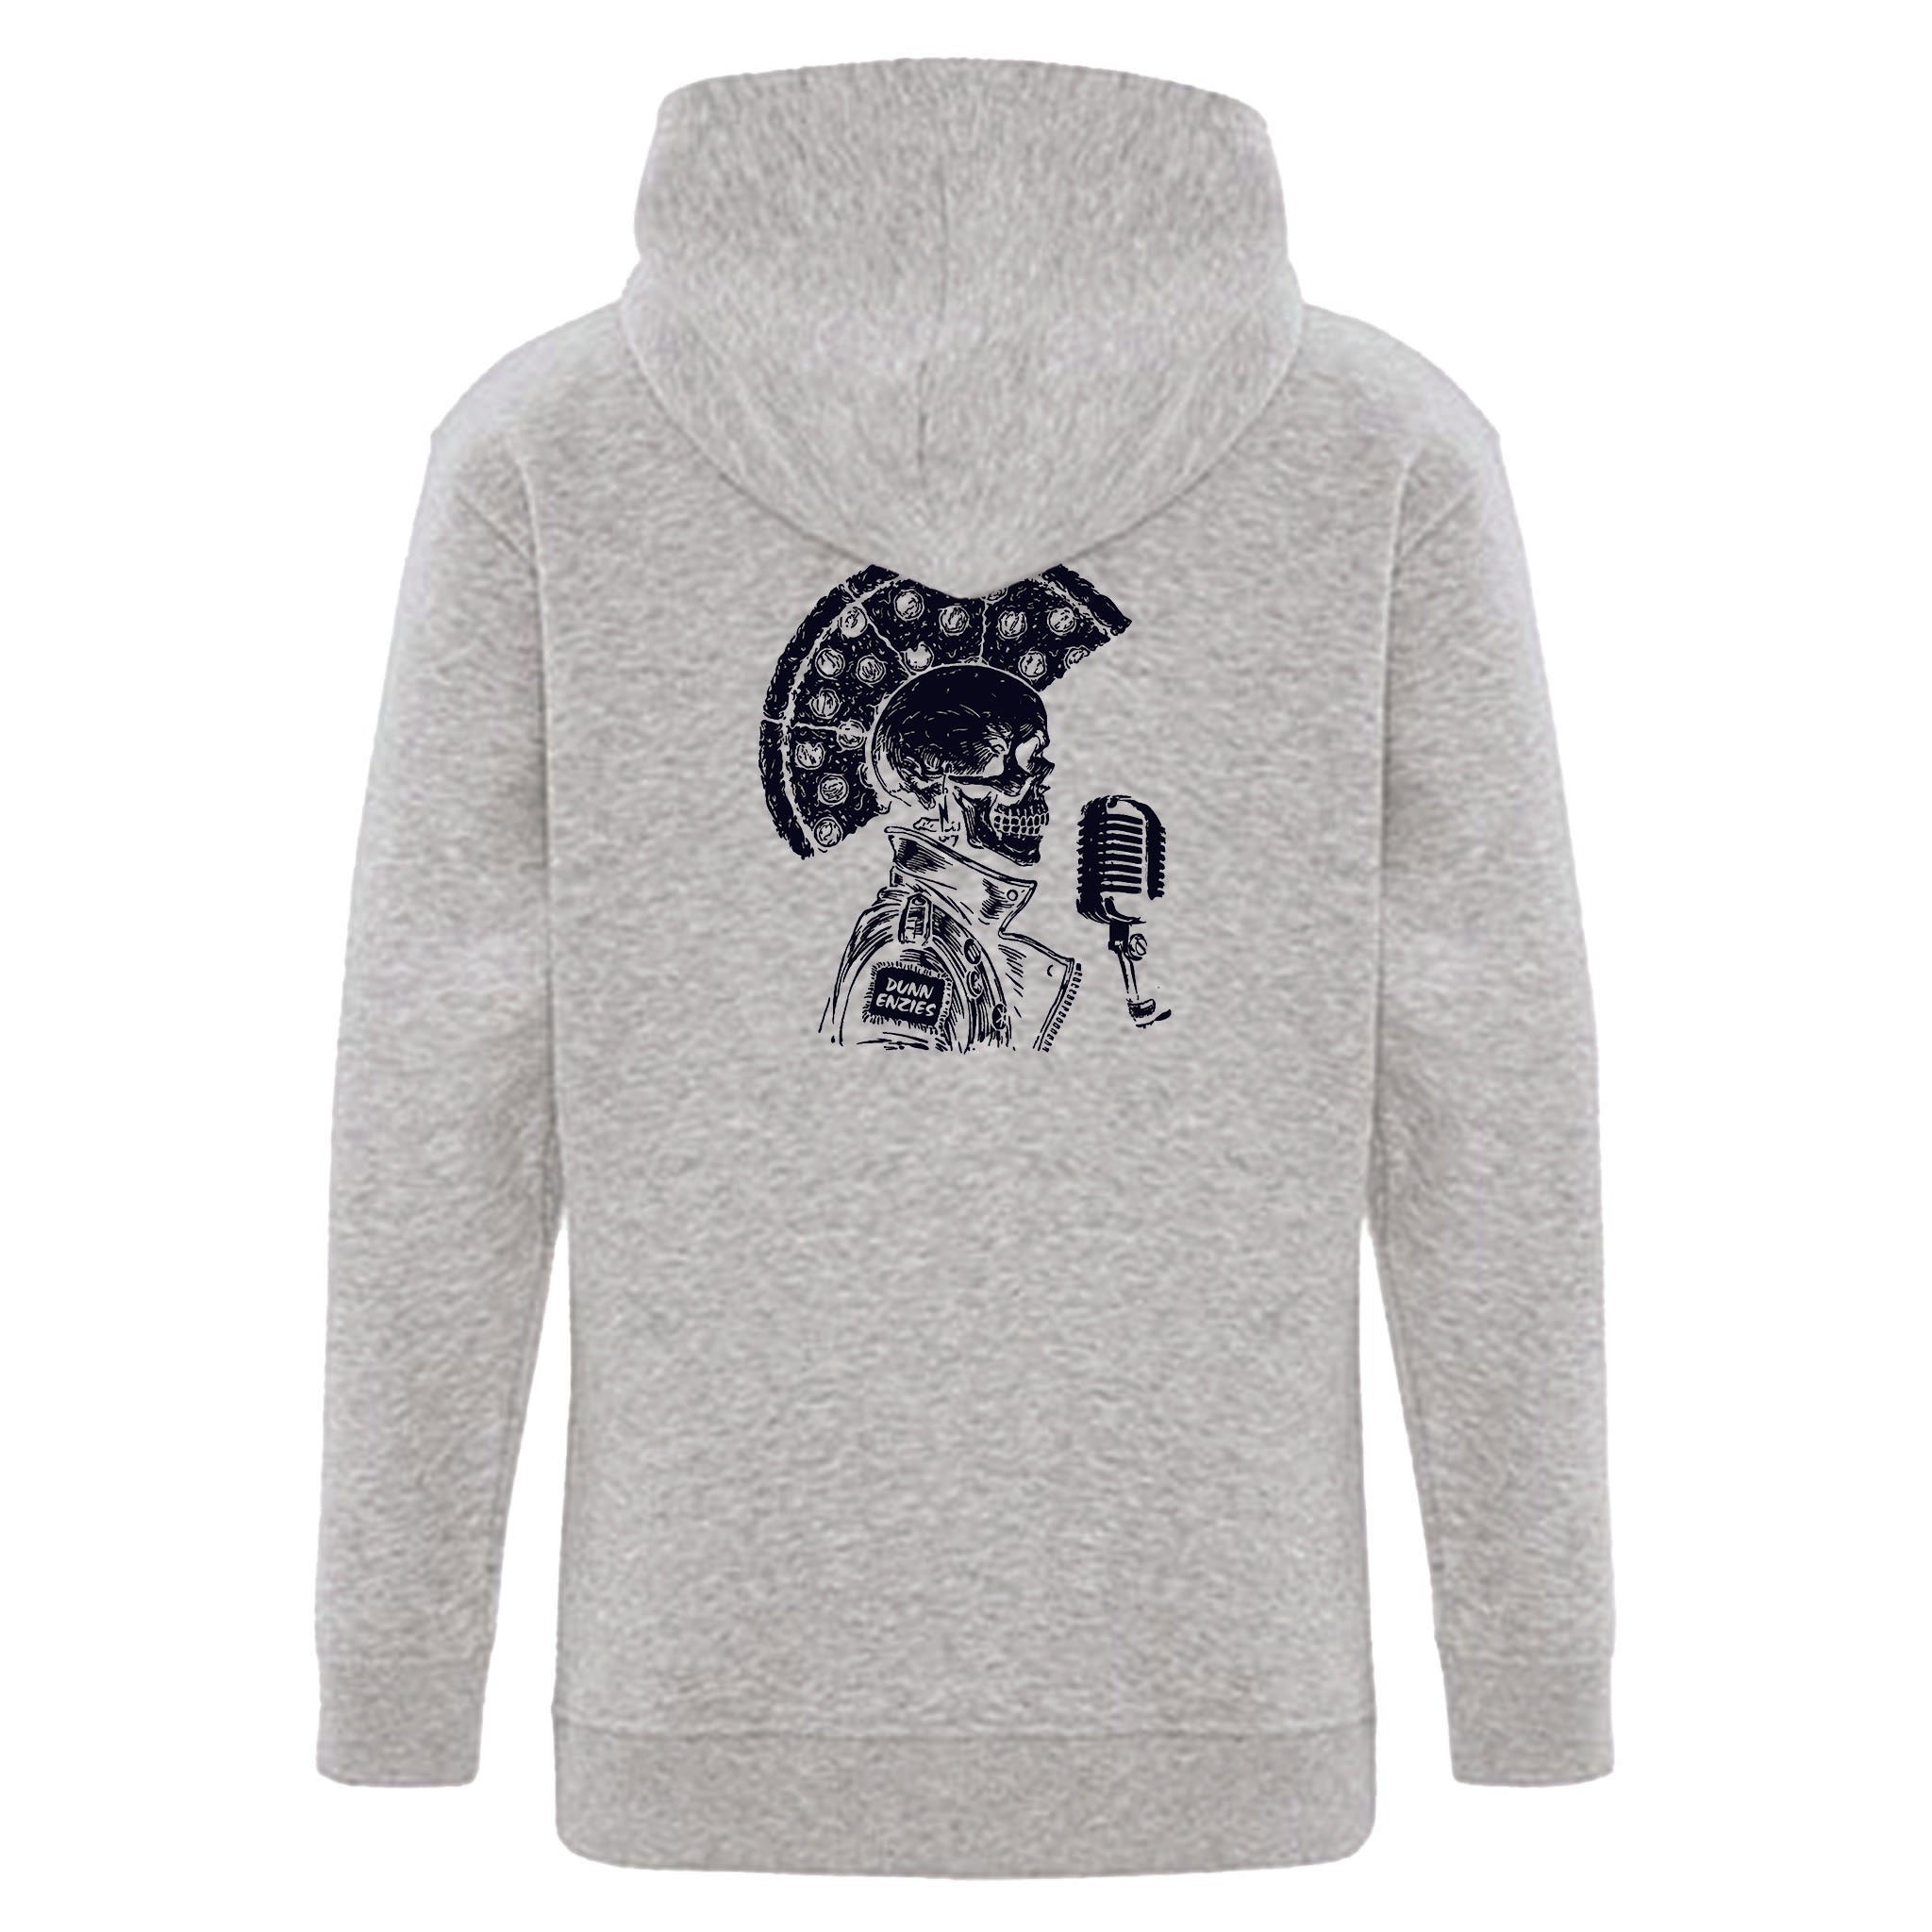 Dunnenzies Refelections Apparel Hooded Sweatshirt - Unisex Sizing XS-4XL - Heather Grey